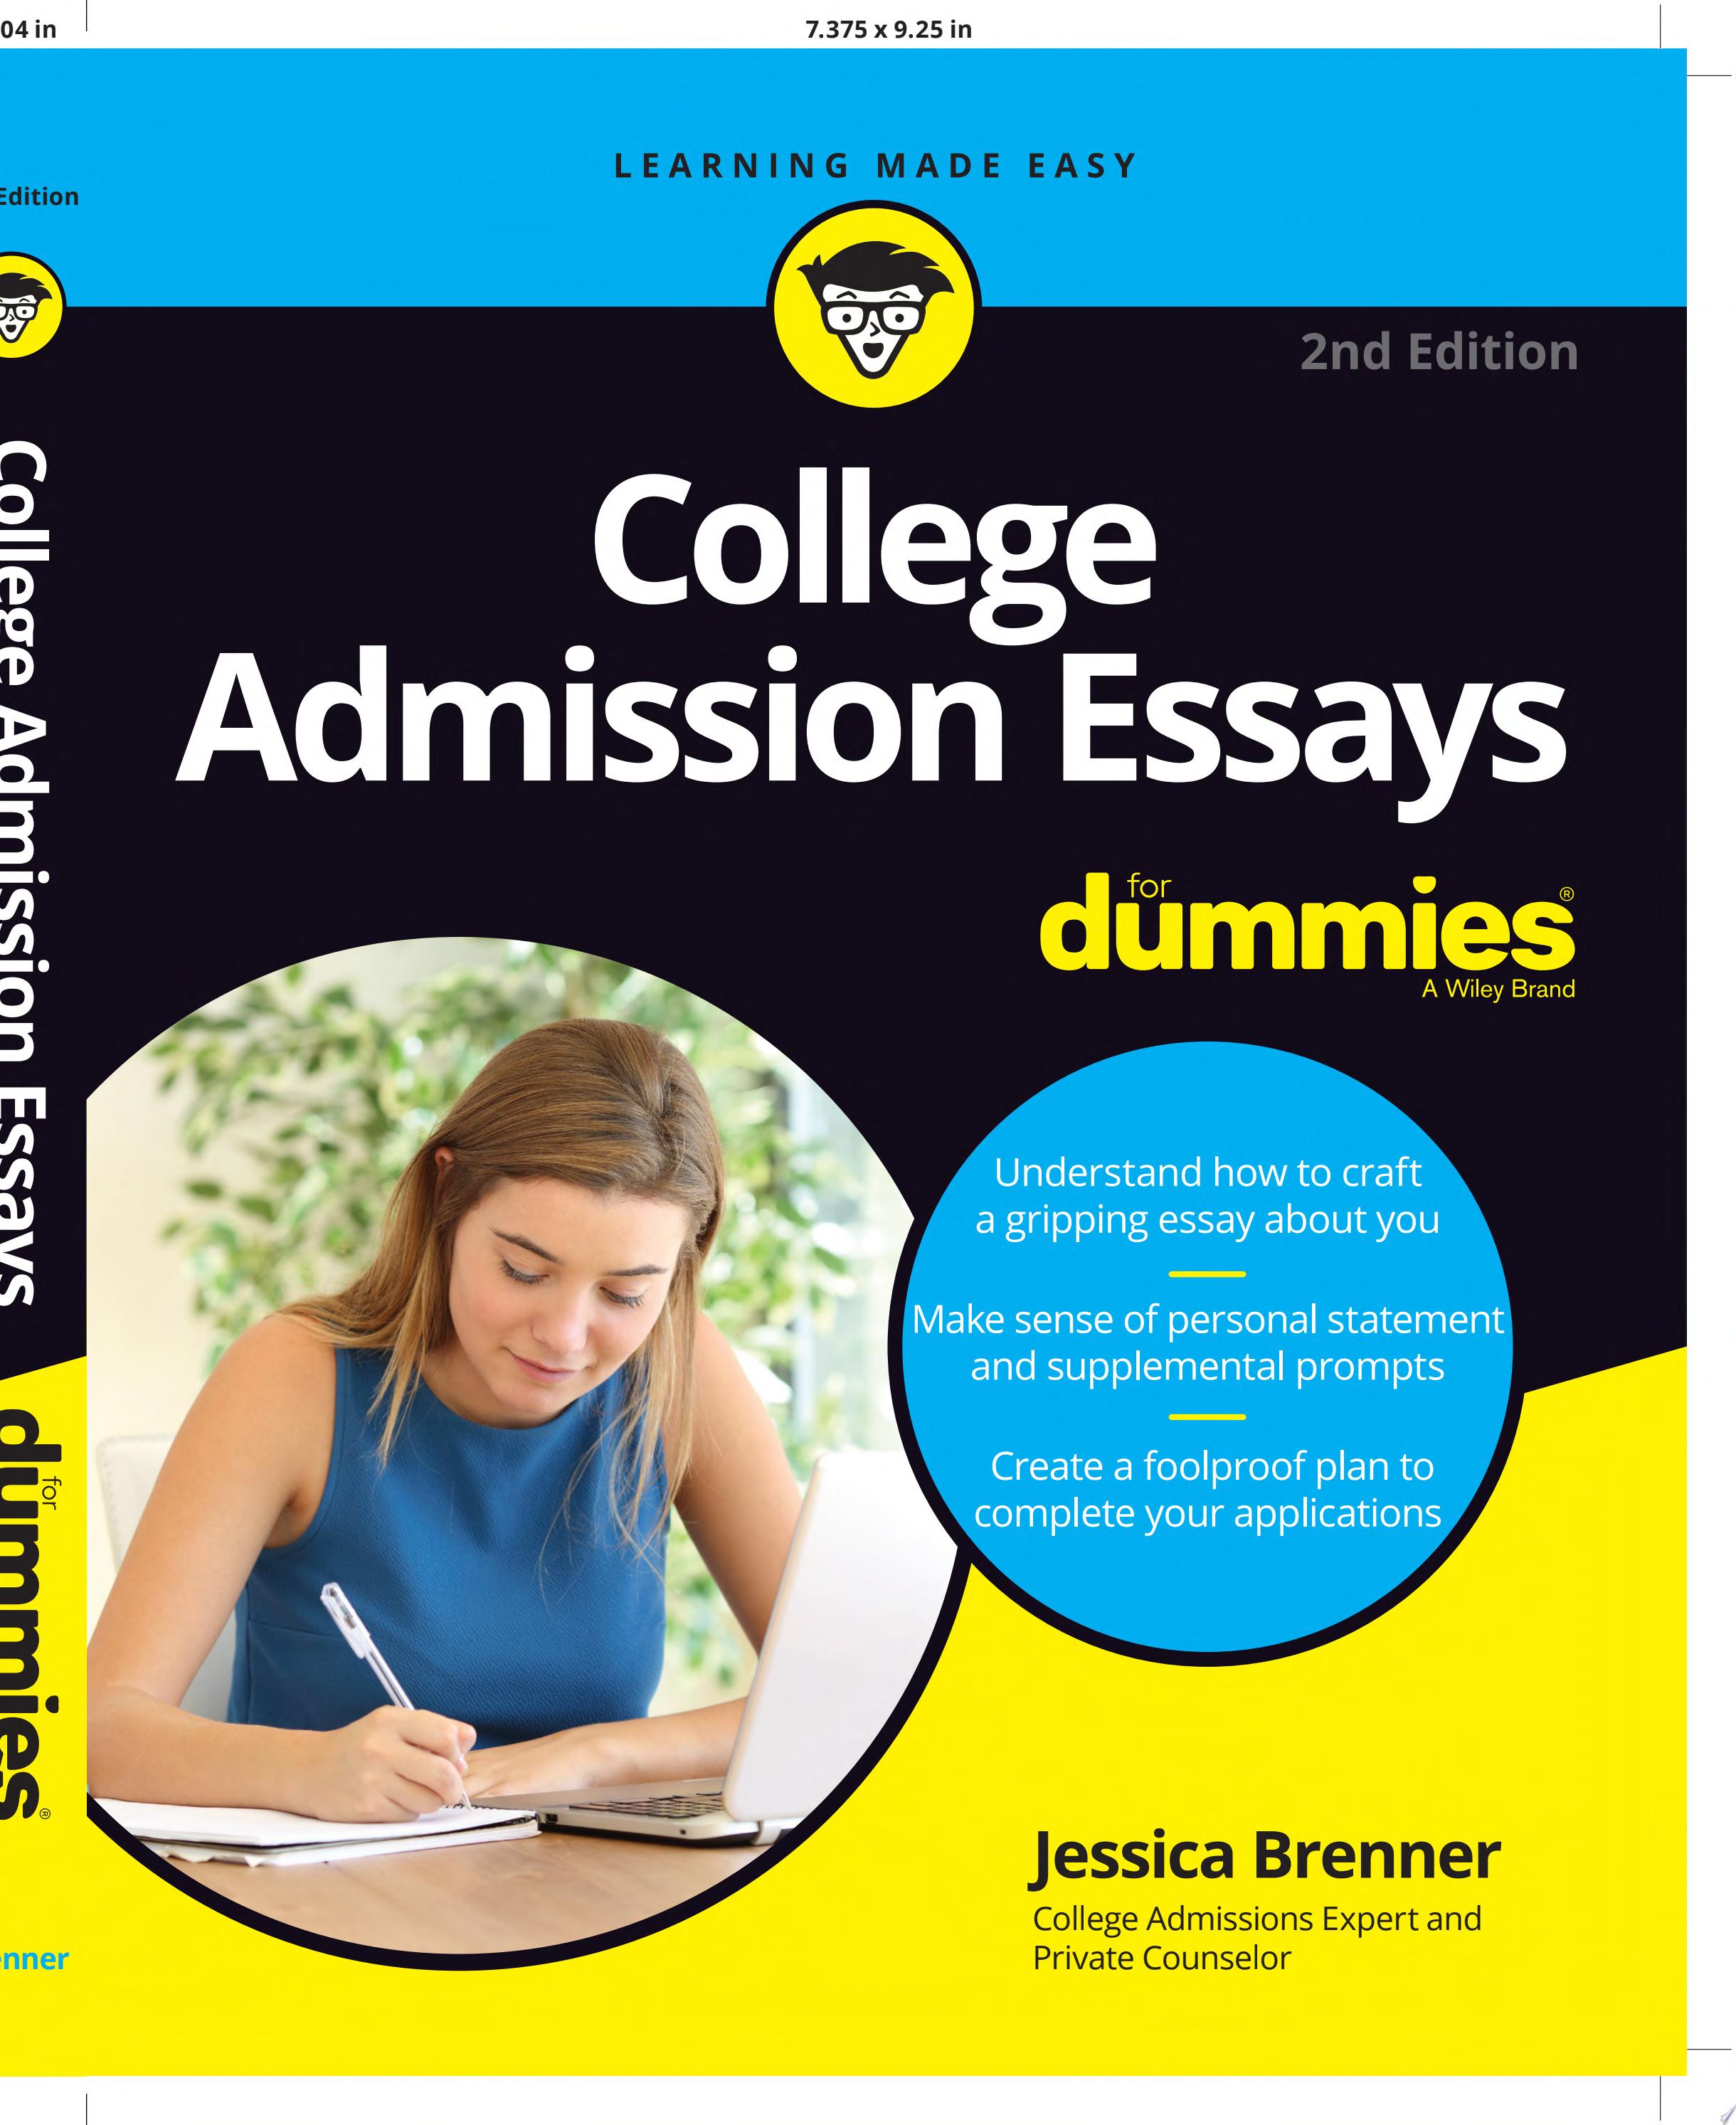 Image for "College Admission Essays For Dummies"